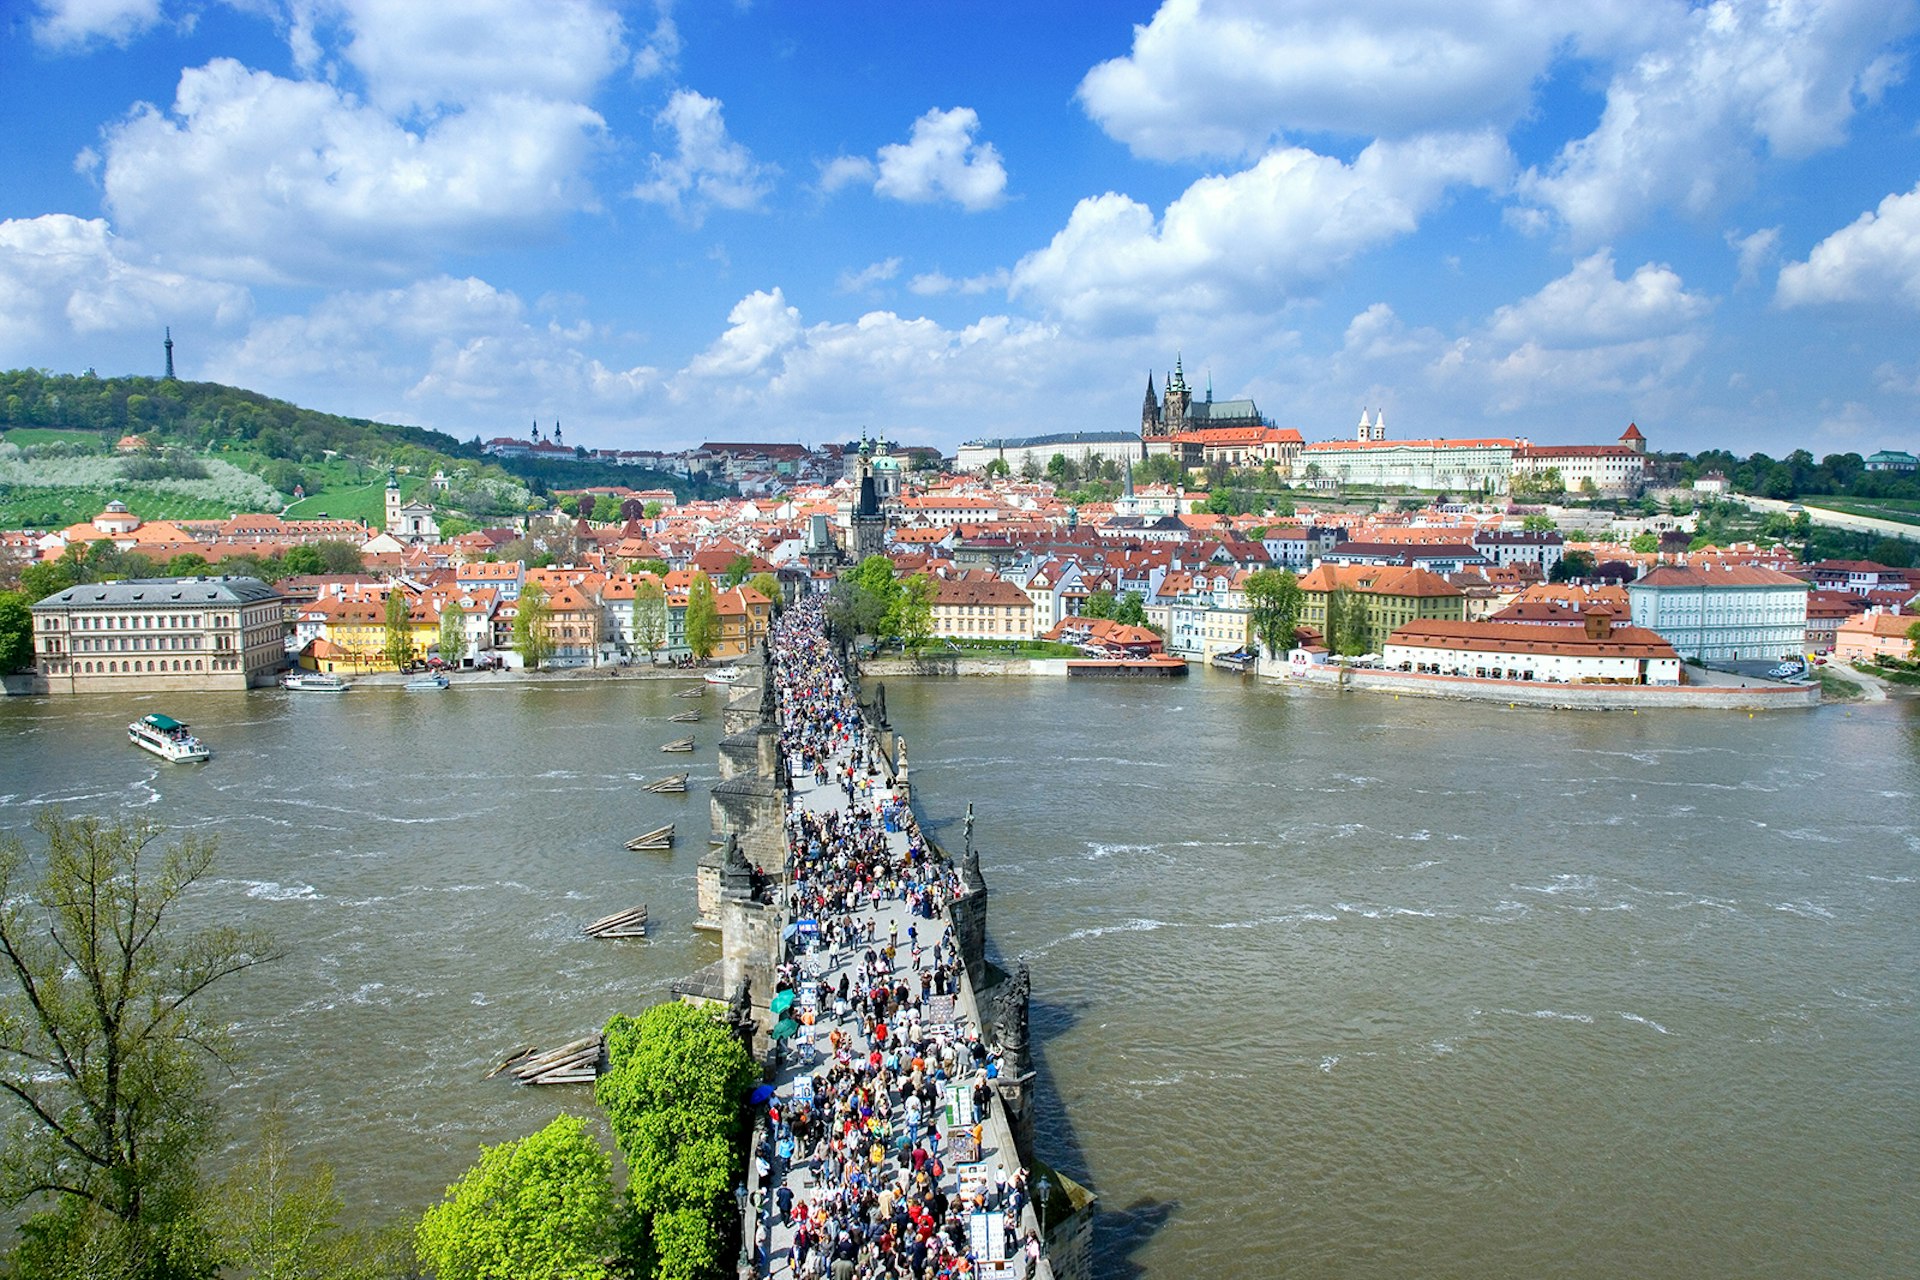 An aerial view of Charles Bridge and people crossing Prague's Vltava River with the castle in the background